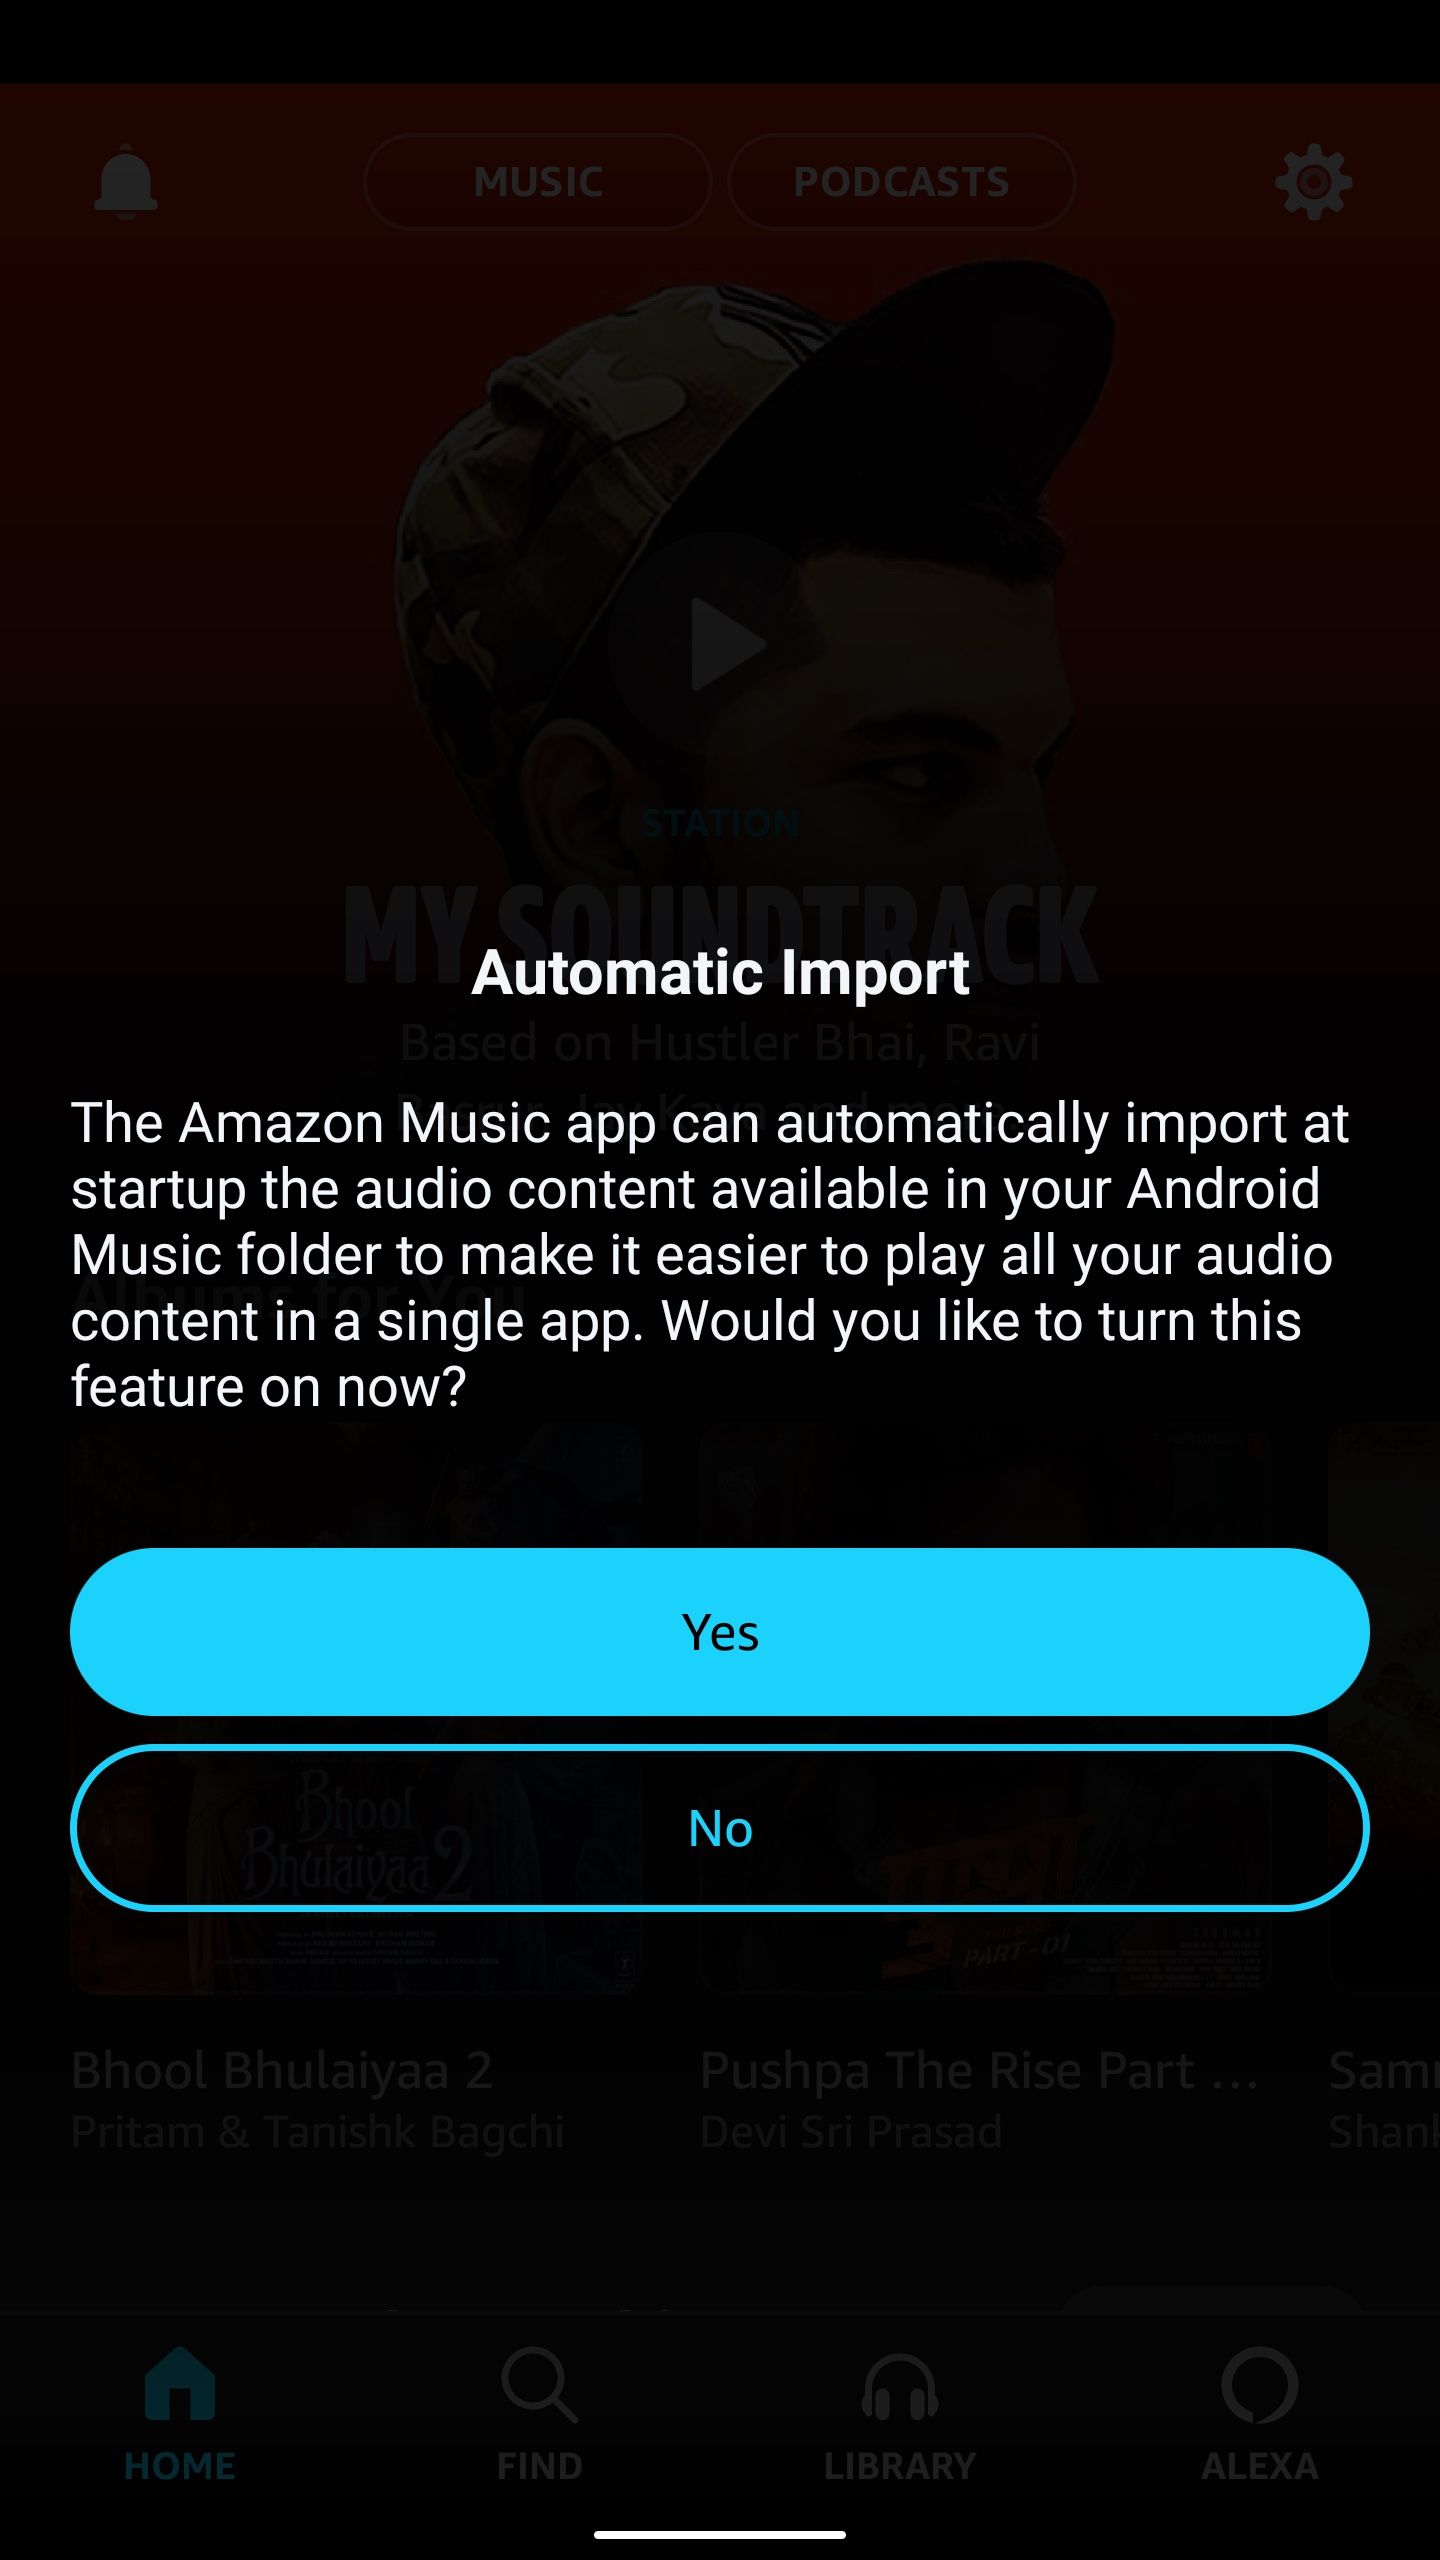 The screenshot shows the Auto Import option during login to the Amazon Music app.